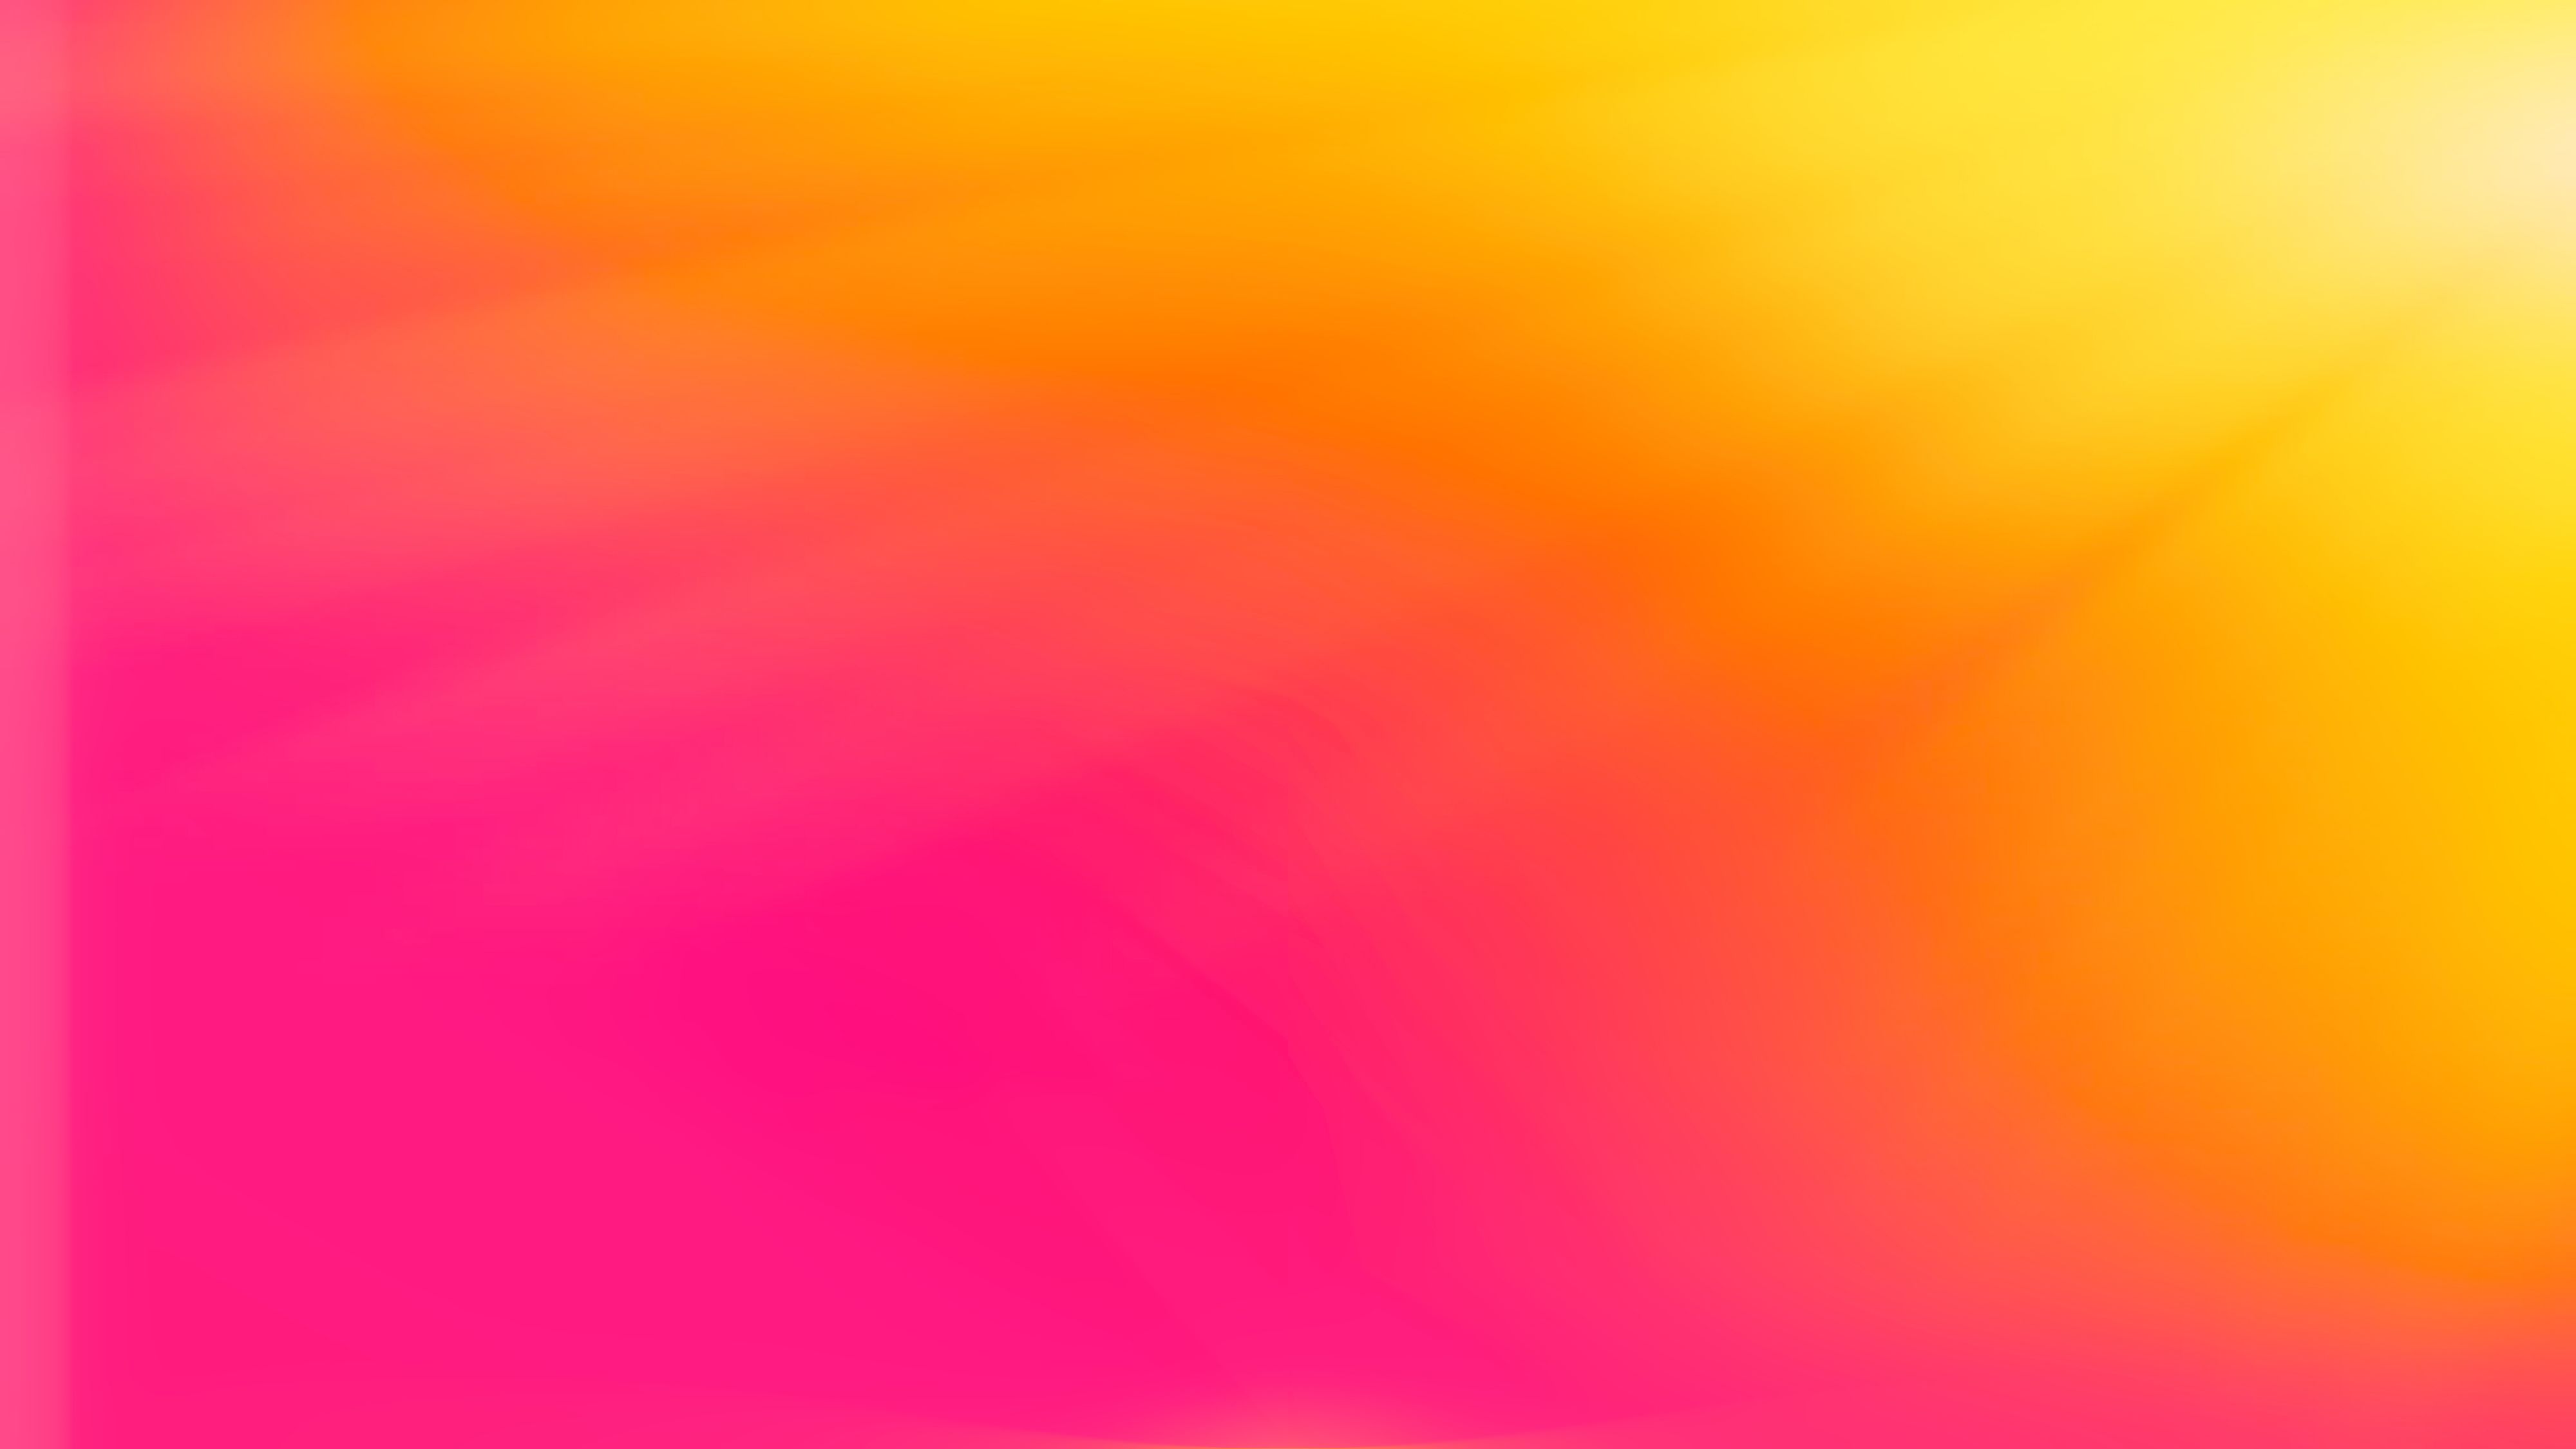 Red Yellow Orange Pink Background Images and Wallpapers – YL Computing